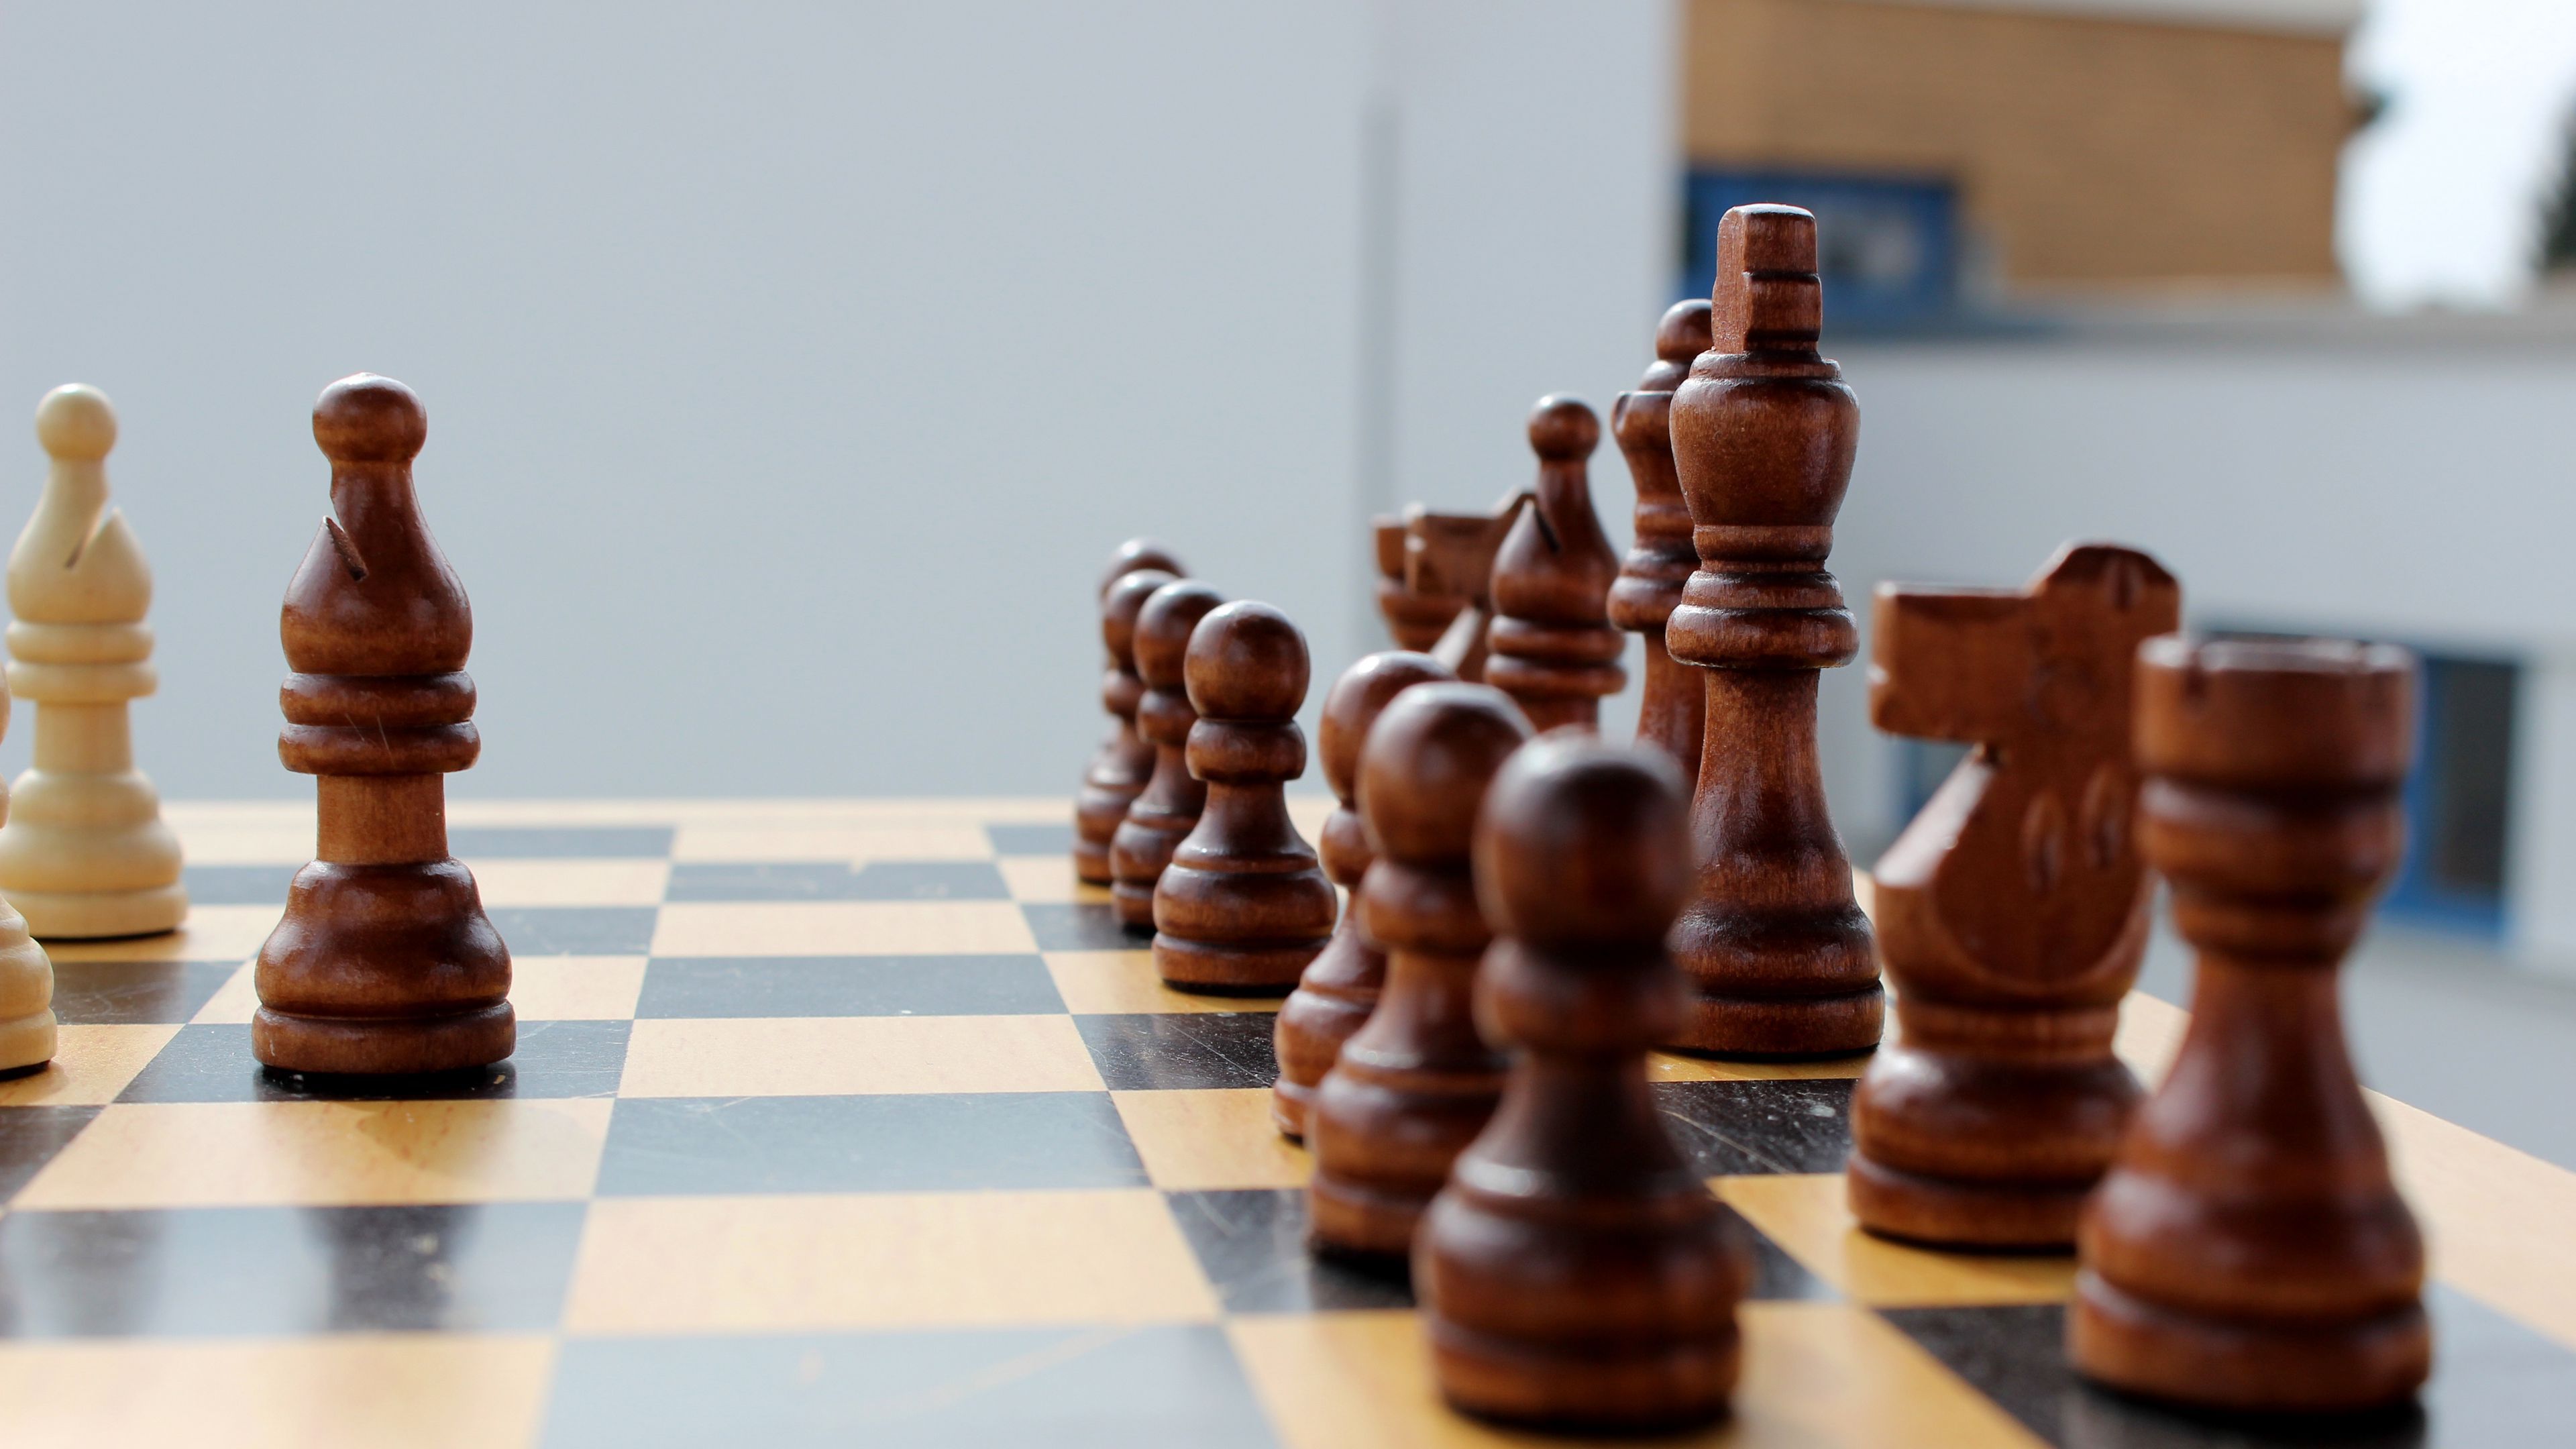 Download wallpaper 3840x2160 chess, chess board, figures 4k uhd 16:9 HD background